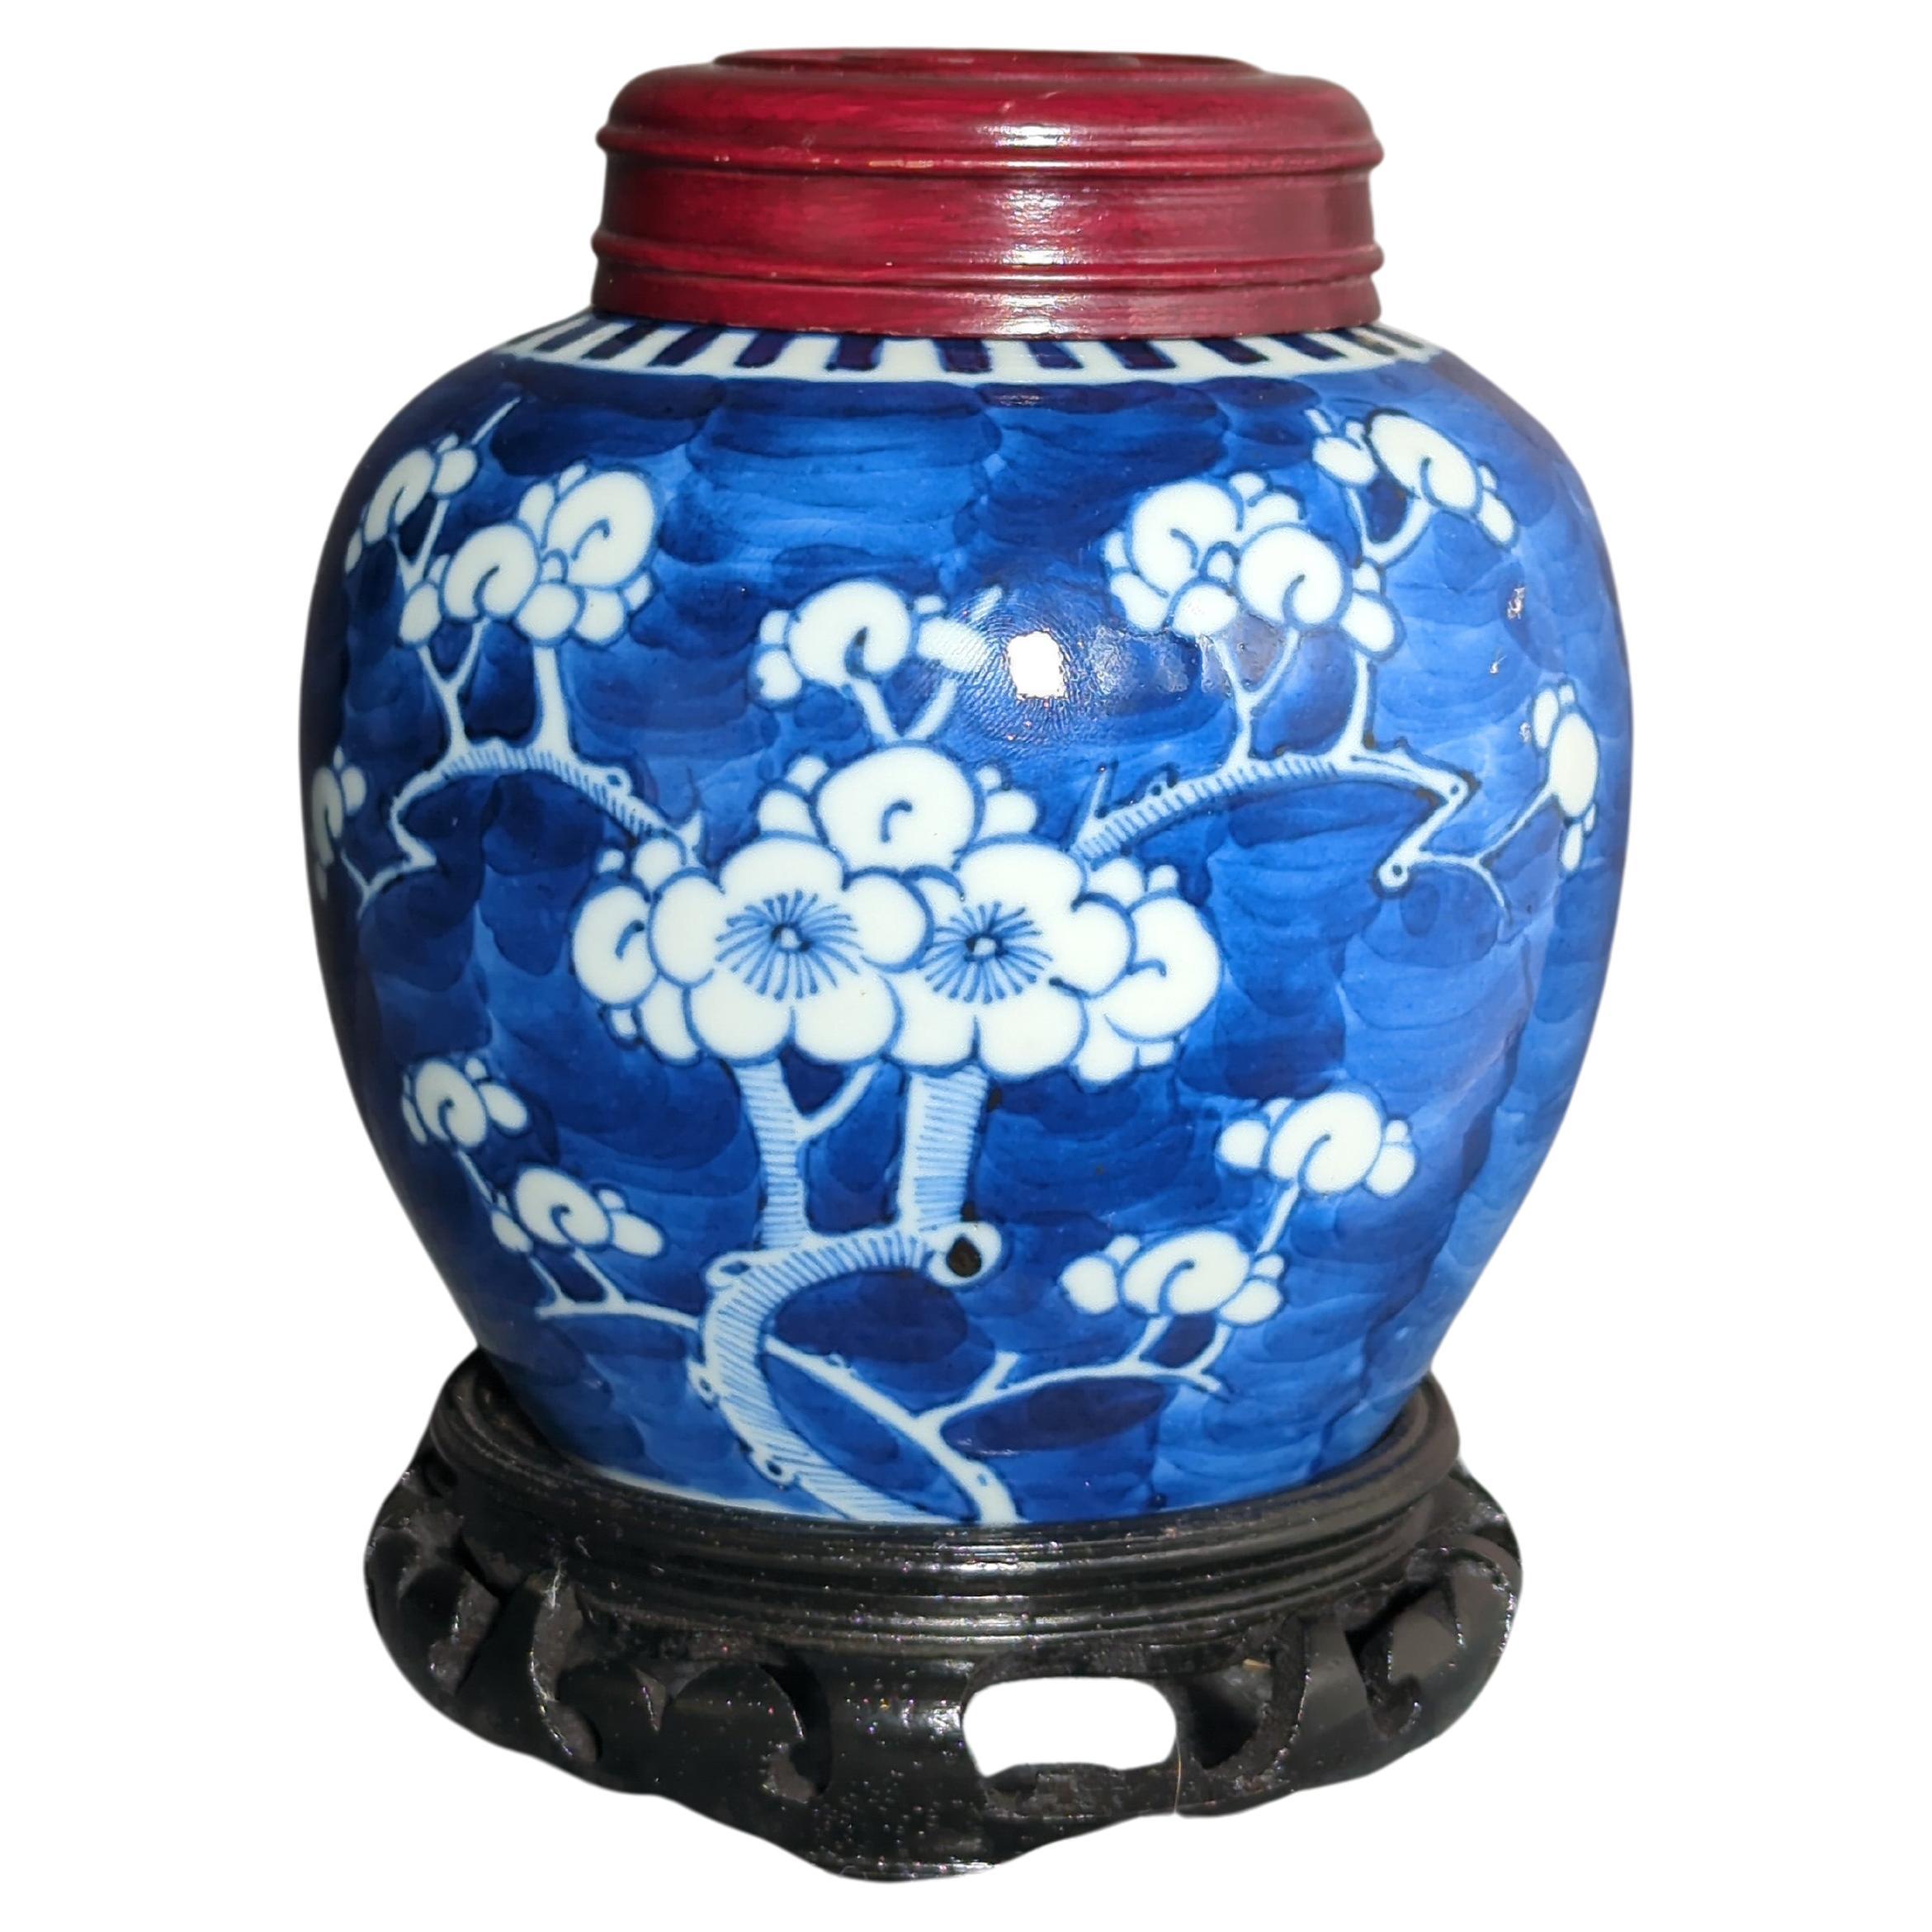 Antique Chinese late Qing dynasty blue and white ginger jar, reserve decorated in underglaze blue and white, with blooming prunus branches on underglaze blue wash ground, and double circle mark in underglaze blue within the footring

Comes with